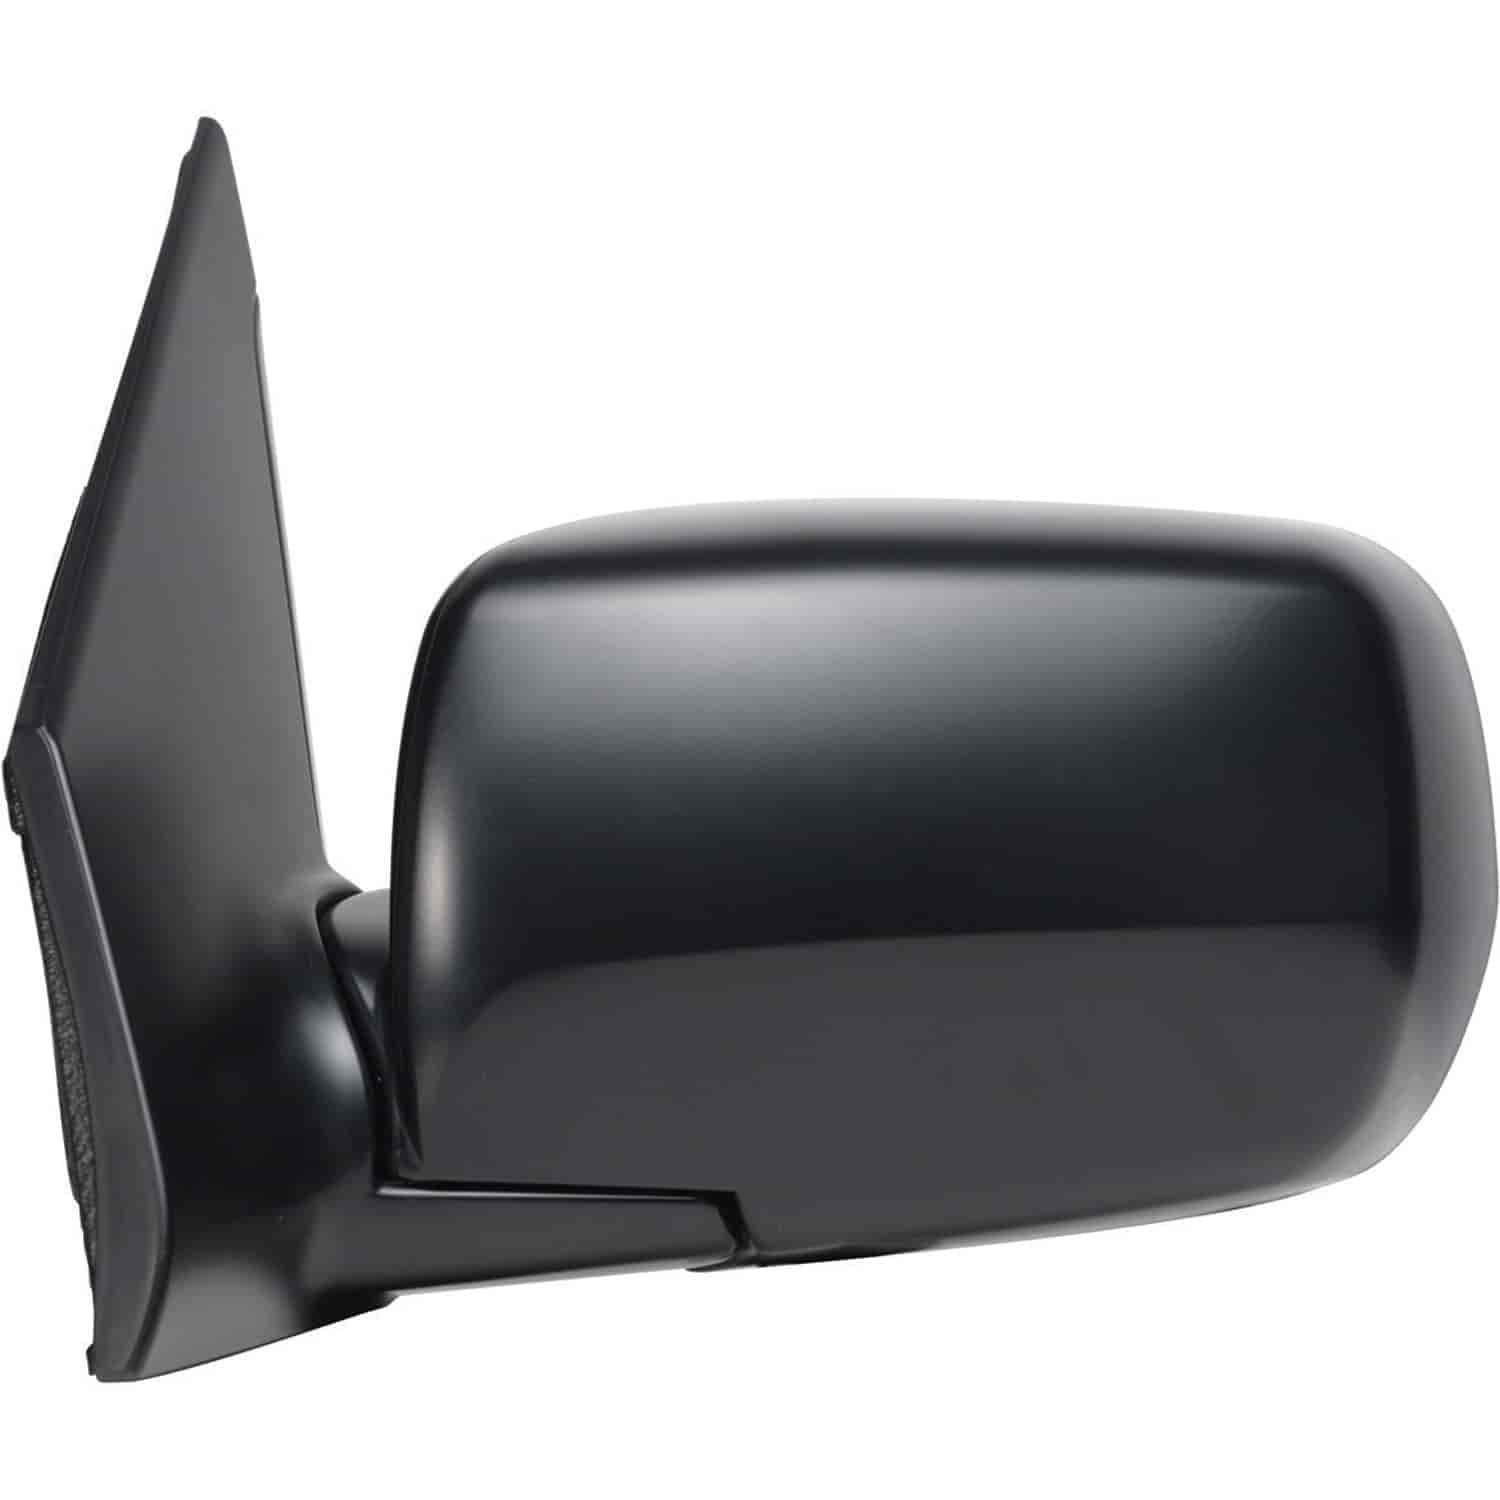 OEM Style Replacement mirror for 03-08 Honda Pilot